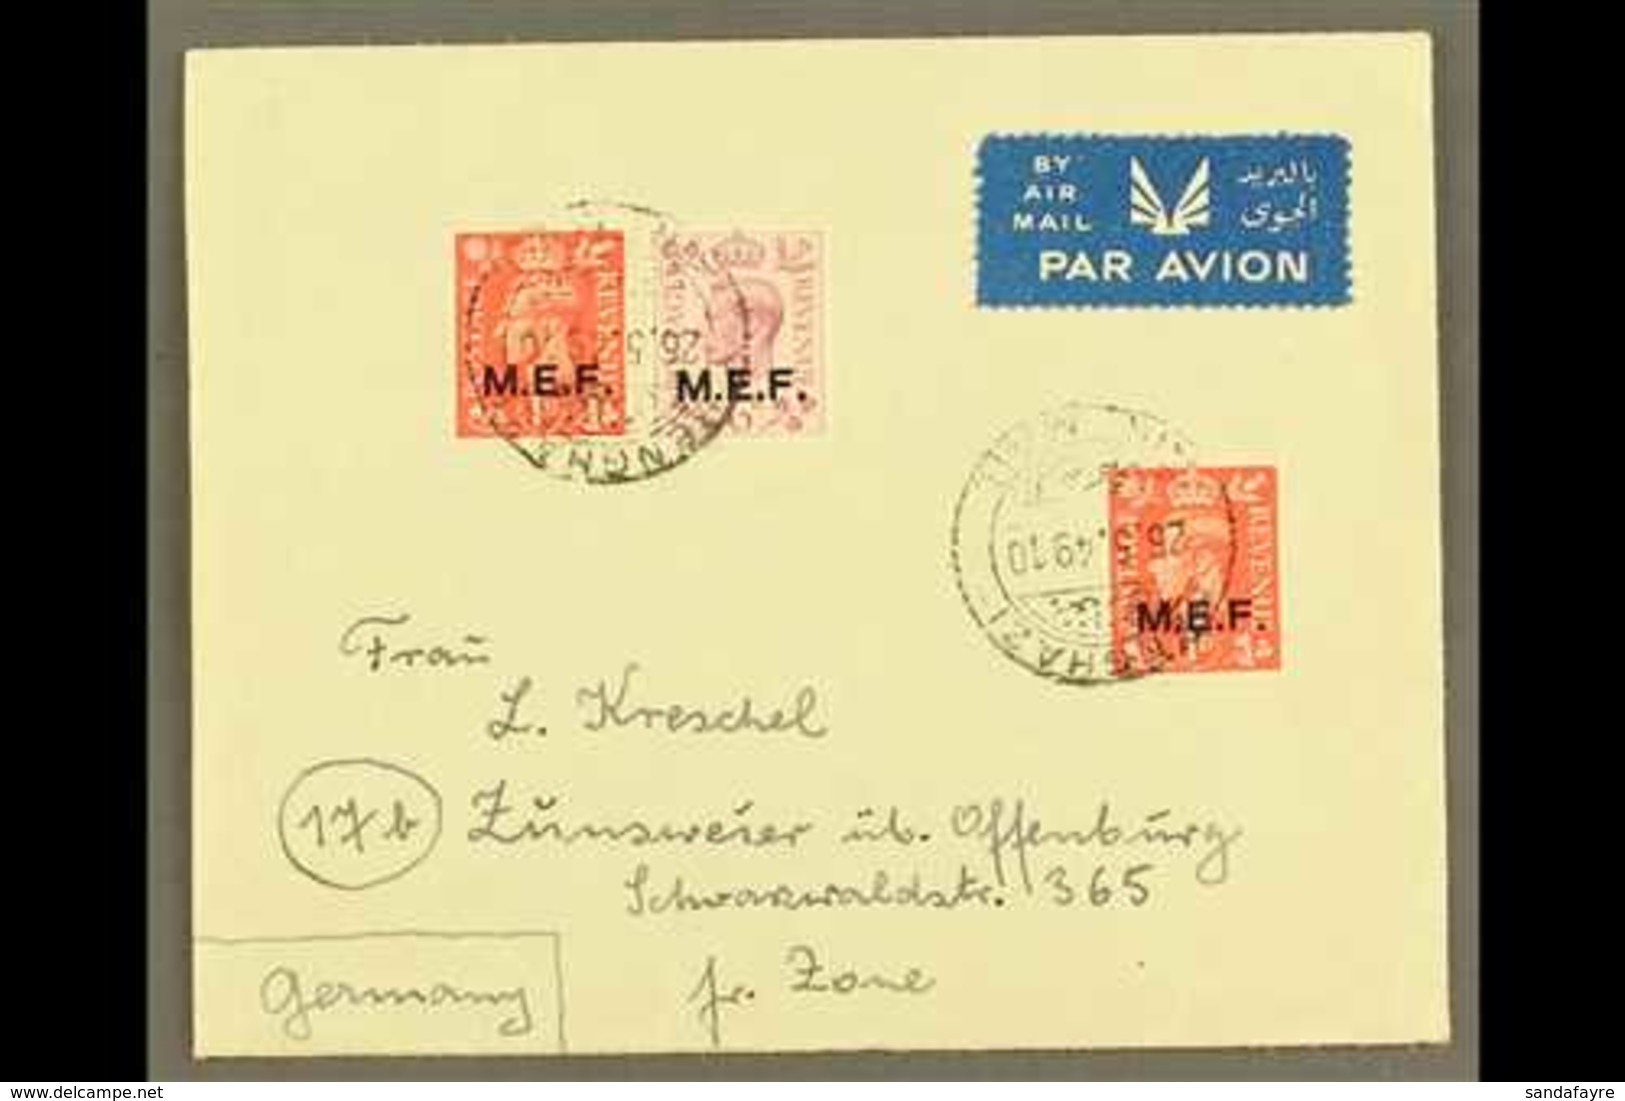 CYRENAICA 1949 Airmailed Cover To French Zone, Germany, Franked KGVI 1d X2 & 6d "M.E.F." Ovpts, SG M11, M16, Benghazi 26 - Afrique Orientale Italienne